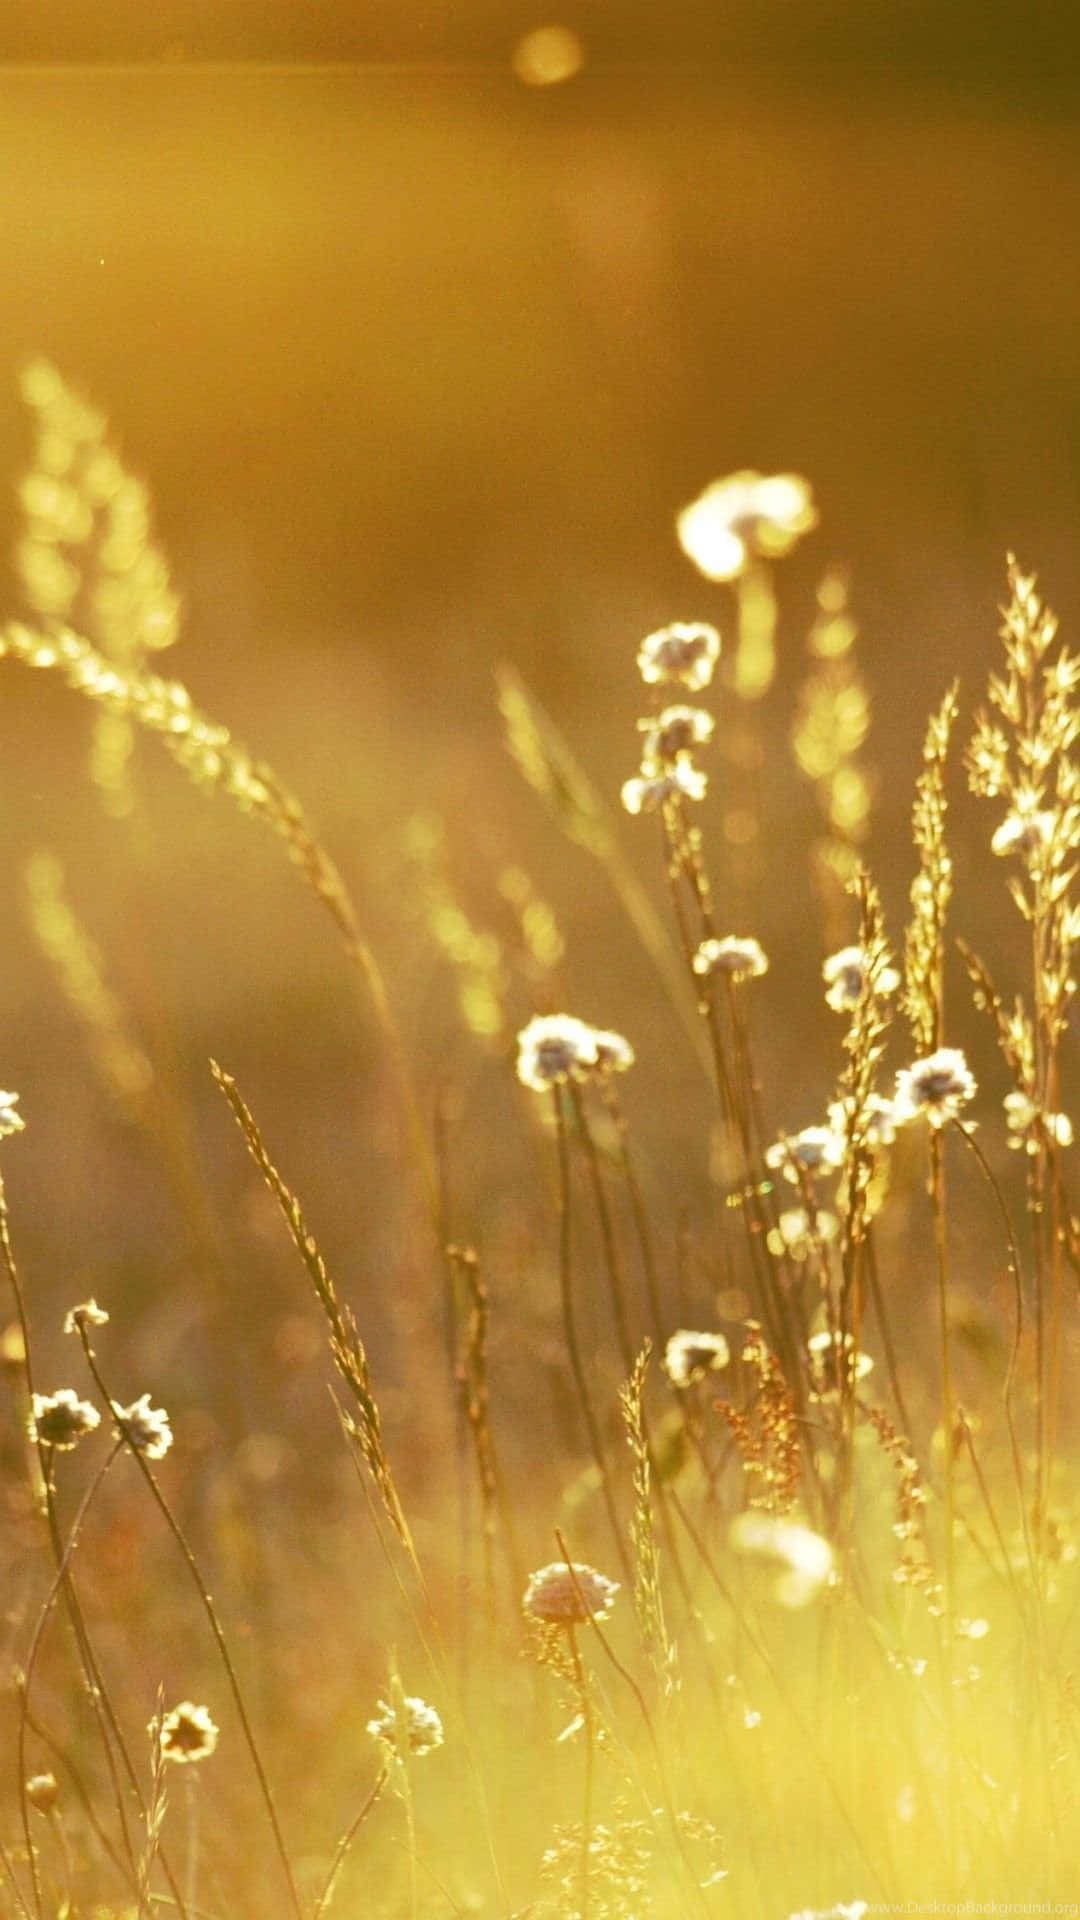 Gold Iphone Wild Grass And Flowers Background